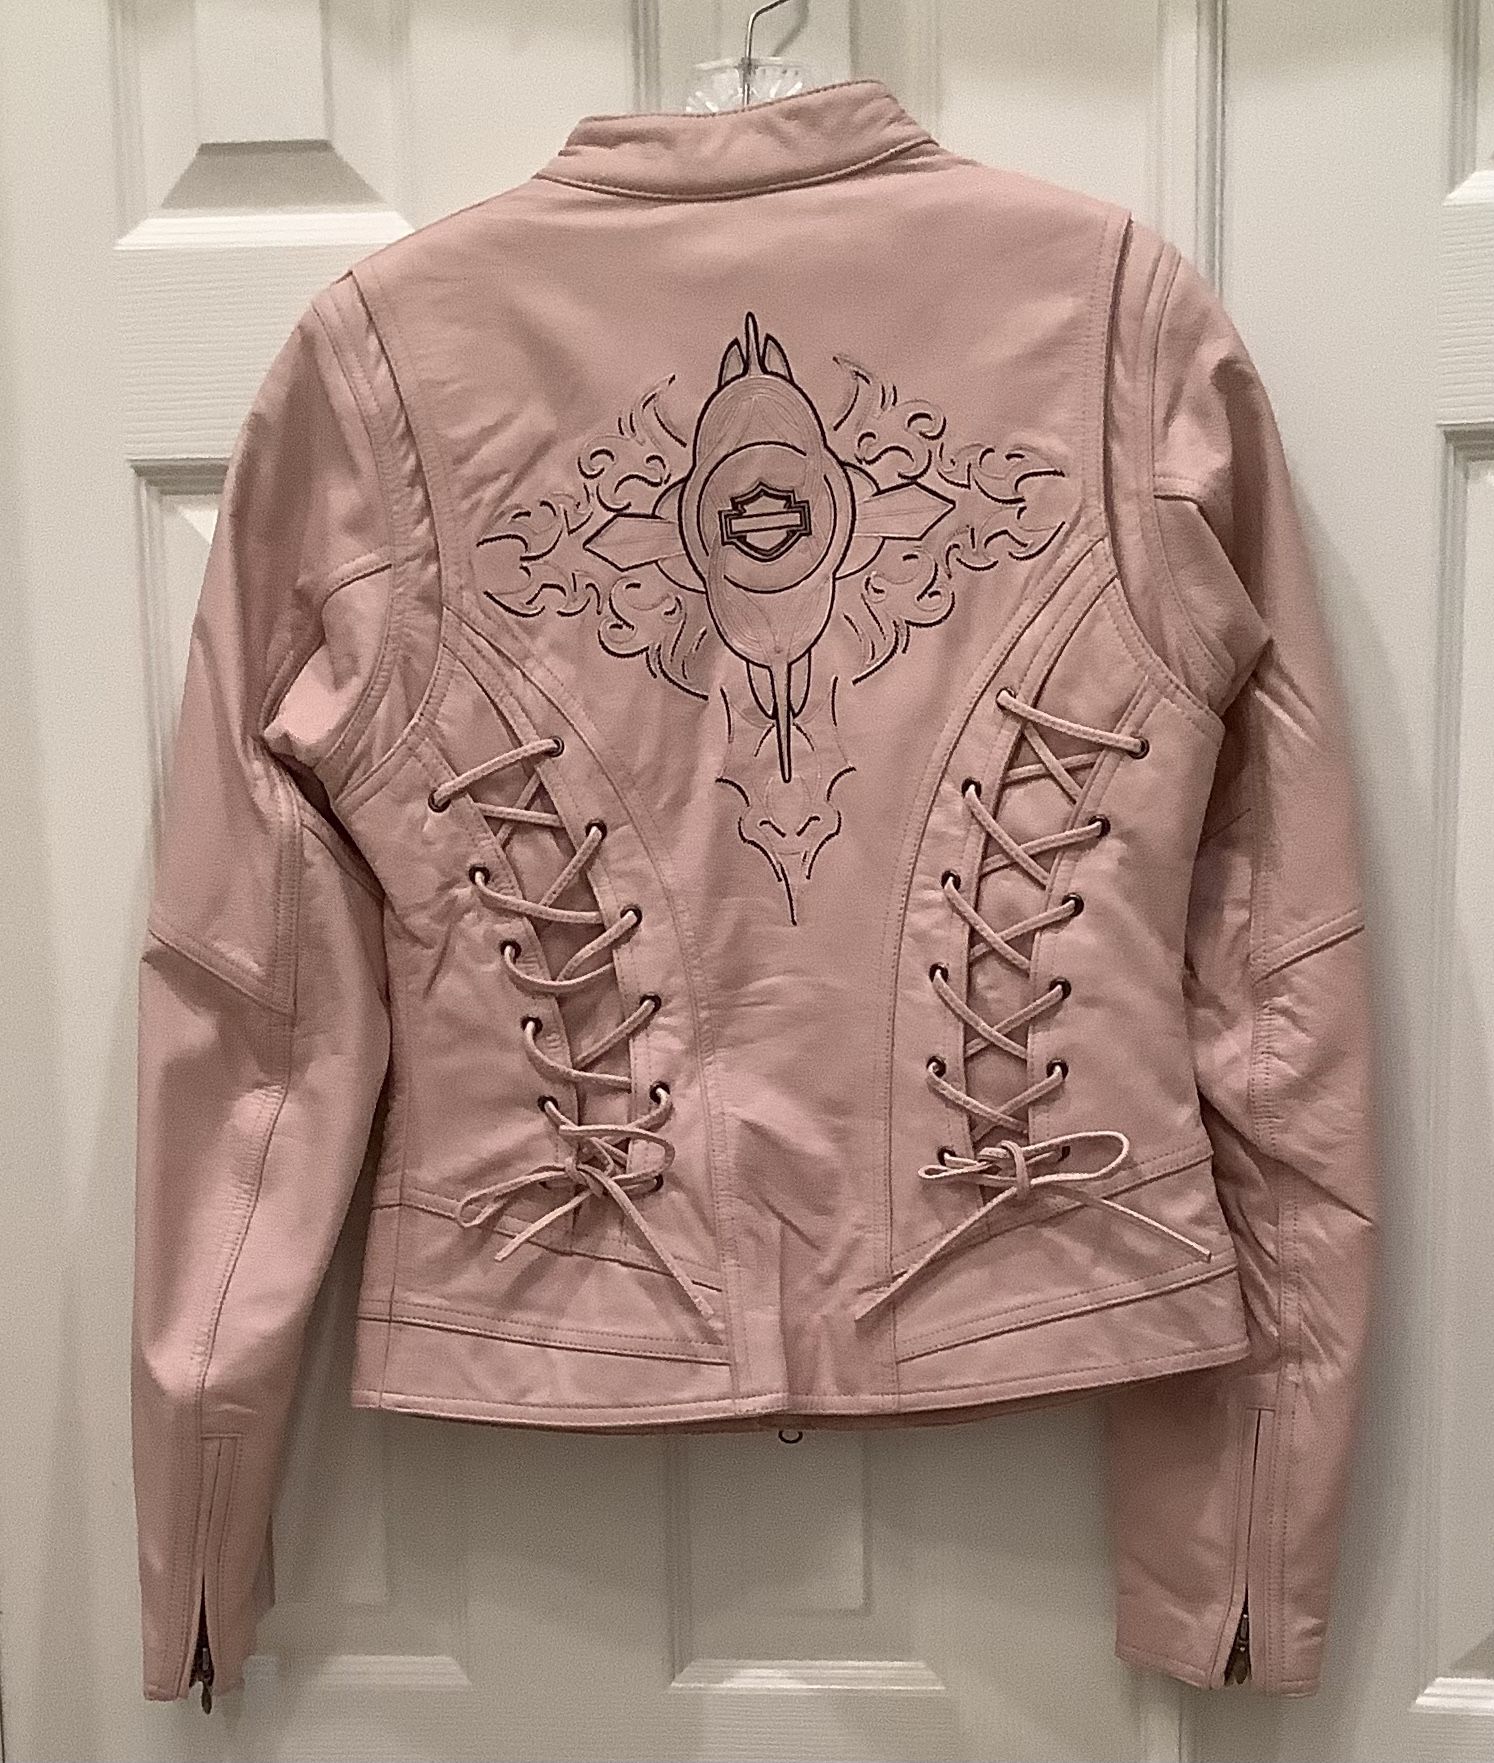 Harley DAVIDSON WOMENS MOTORCYCLE JACKET  PINK  SIGNED ON ARM LACES  Rare Mint,  Small